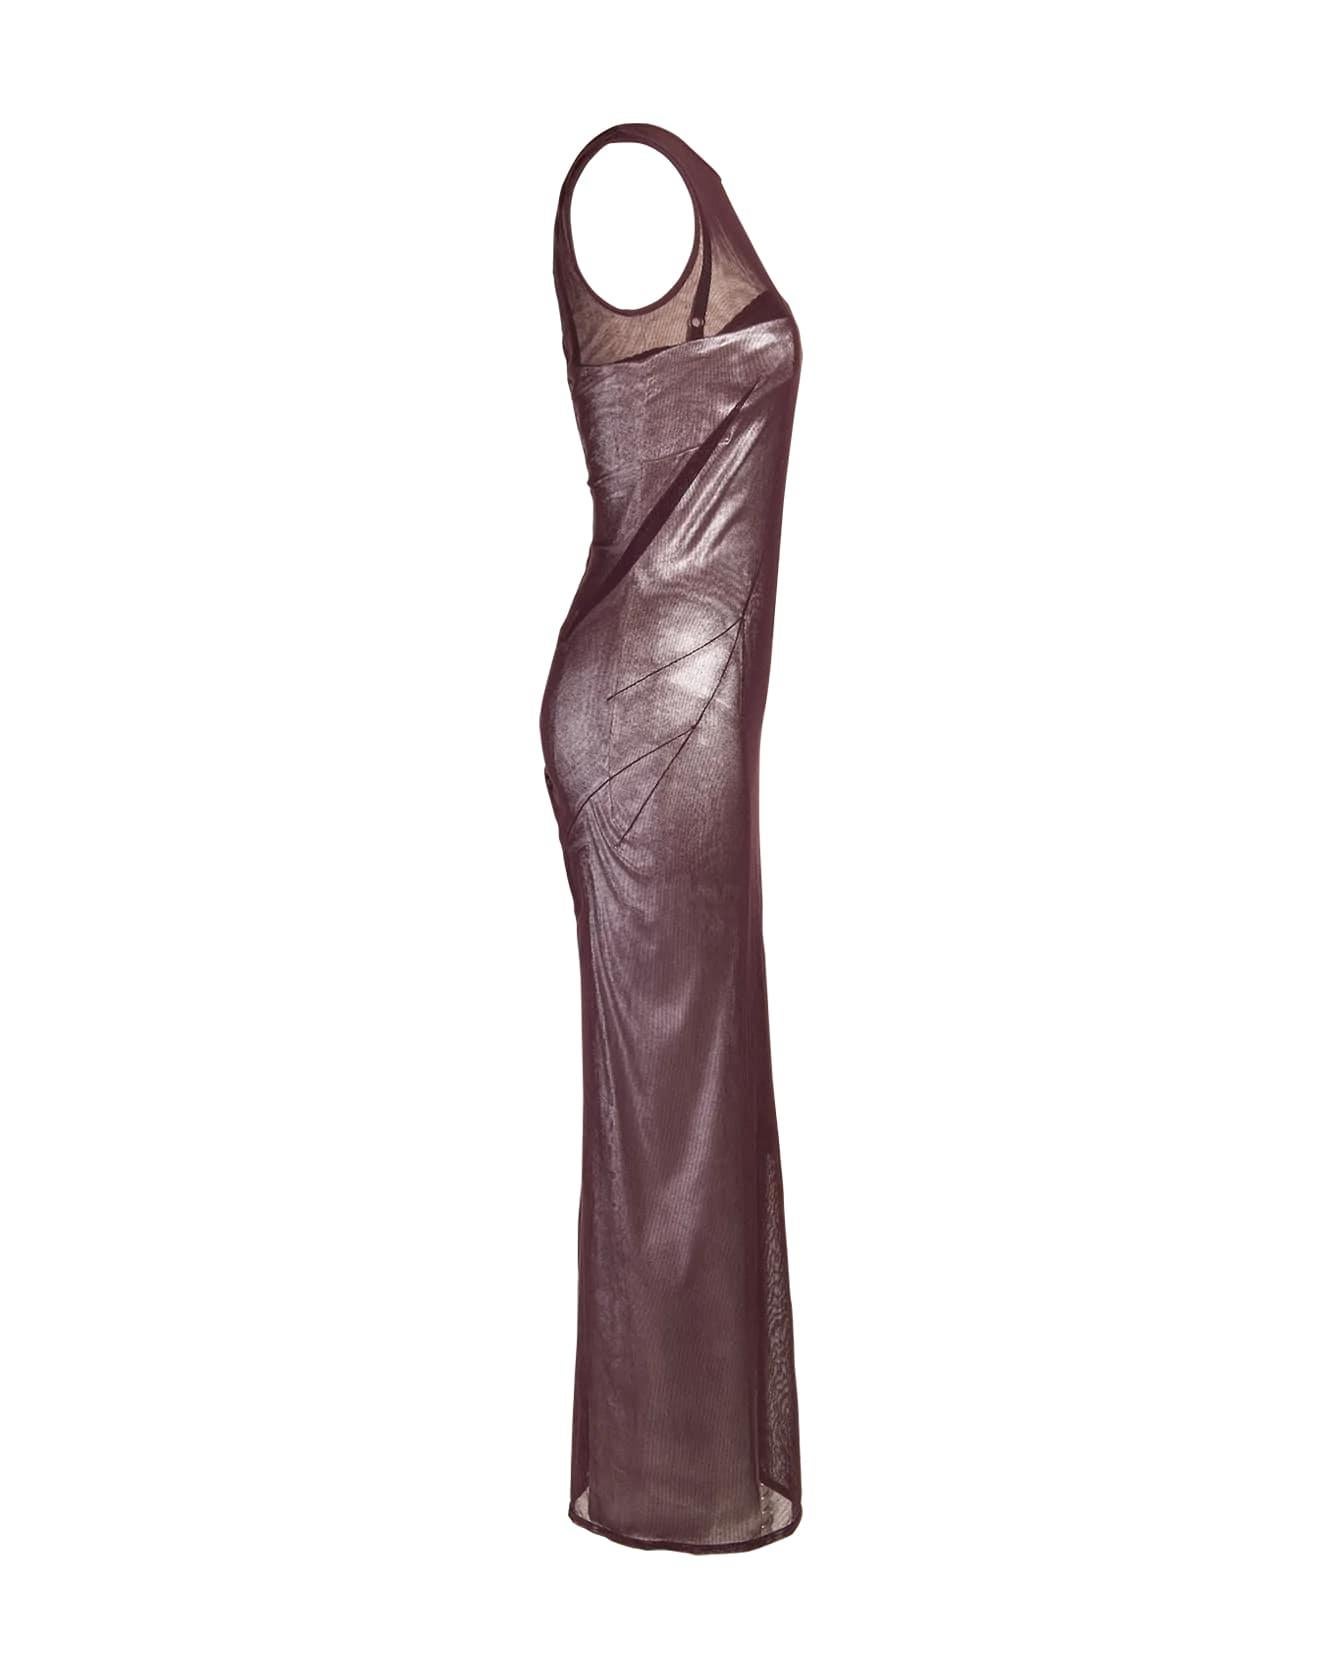 A/W 1998 Dolce & Gabbana midi dress with purple mesh net fabric layered over metallic silver bodycon dress. Silver layer has subtle jacquard pattern throughout. Built-in bra creates structured bust. 